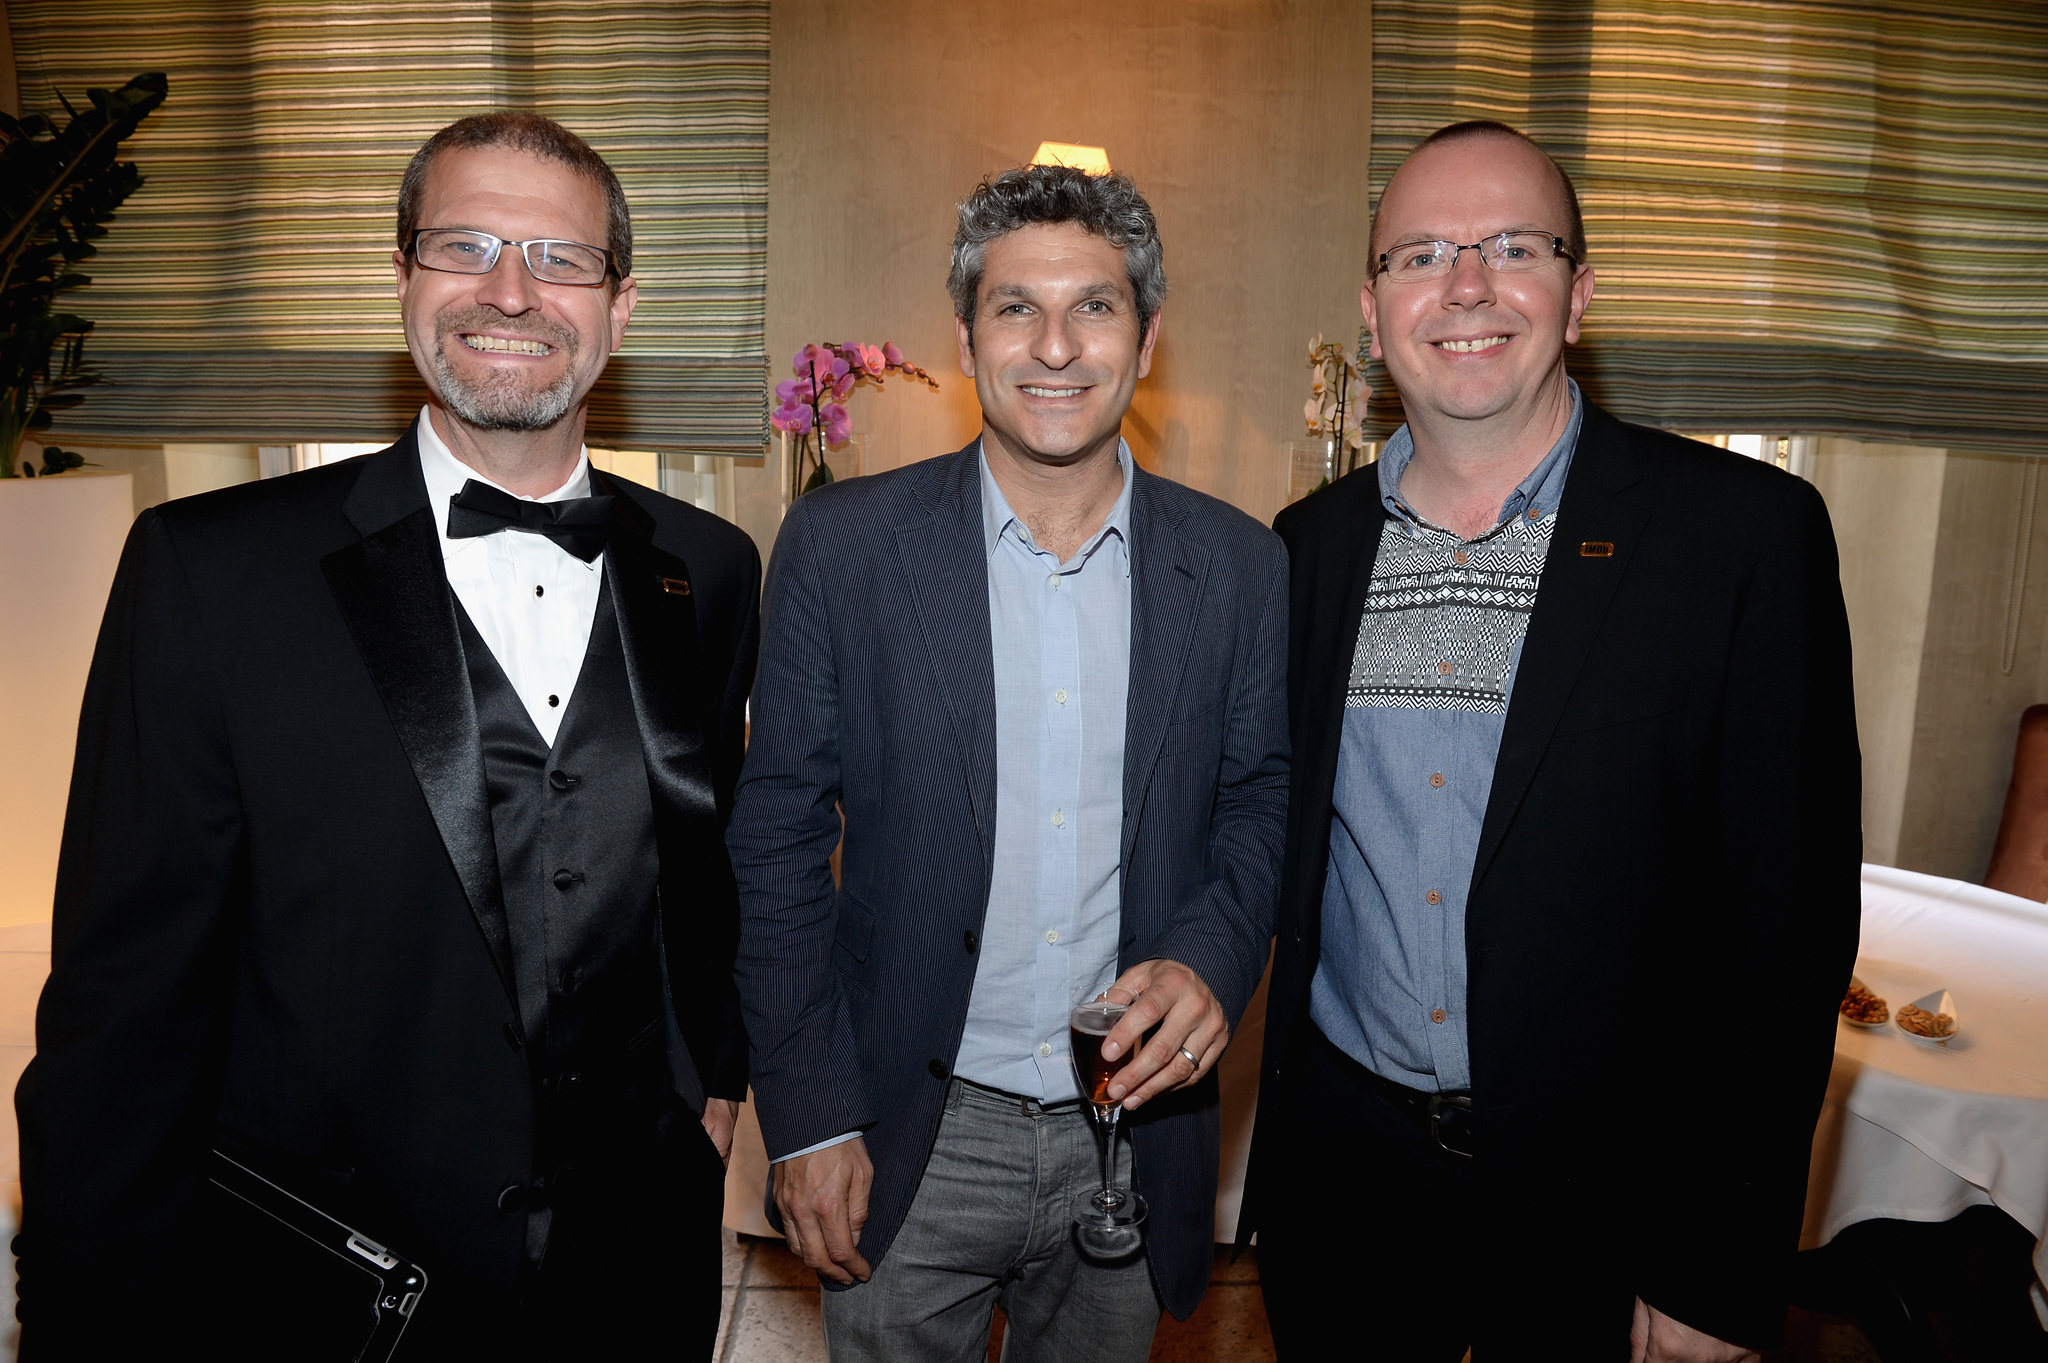 IMDb's Keith Simanton, London Film Critics' Circle Chairman Jason Solomans and IMDb founder Col Needham attend the IMDB's 2013 Cannes Film Festival Dinner Party during the 66th Annual Cannes Film Festival at Restaurant Mantel on May 20, 2013 in Cannes, France.